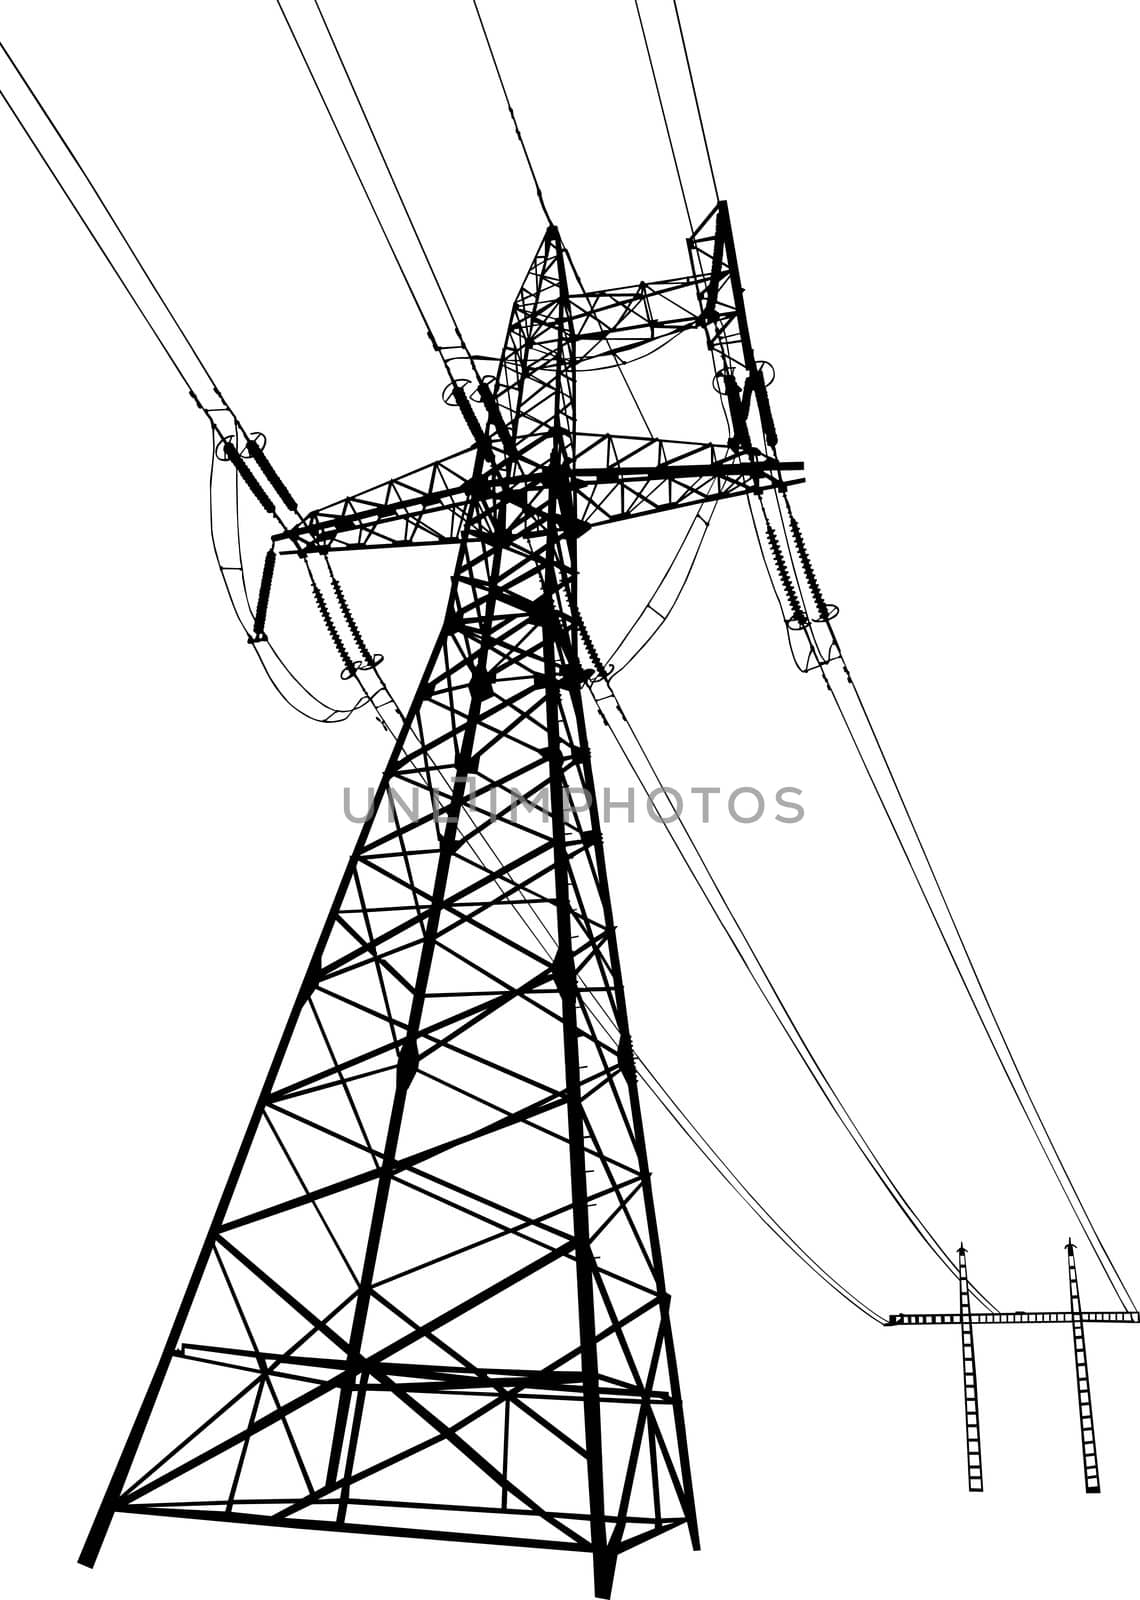 Silhouette of Power lines and electric pylons